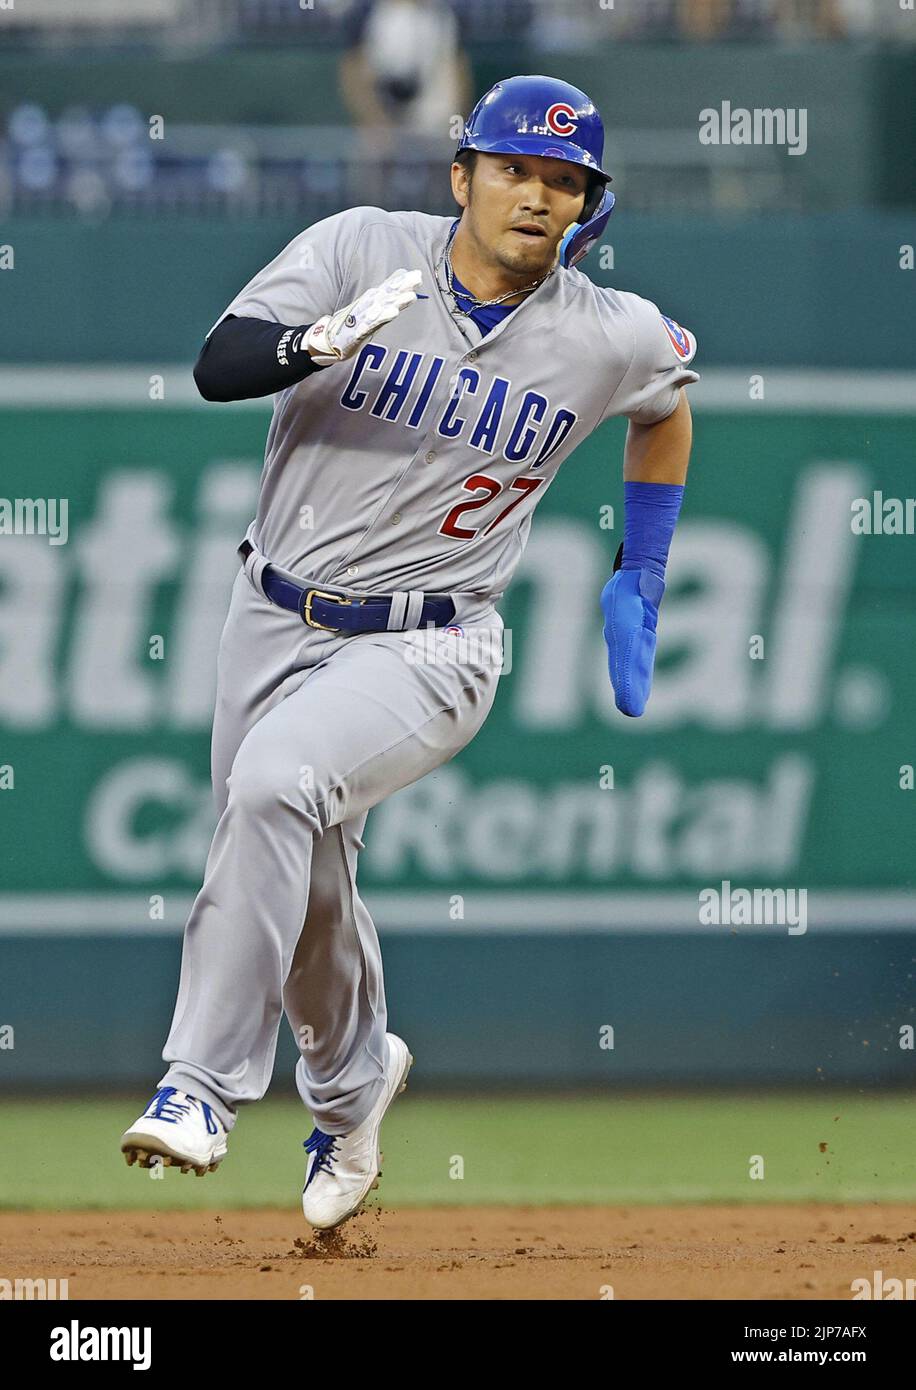 Seiya Suzuki of the Chicago Cubs rounds the bases to score on a Franmil Reyes triple in the first inning of a baseball game against the Washington Nationals on Aug. 15, 2022, at Nationals Park in Washington. (Kyodo)==Kyodo Photo via Credit: Newscom/Alamy Live News Stock Photo